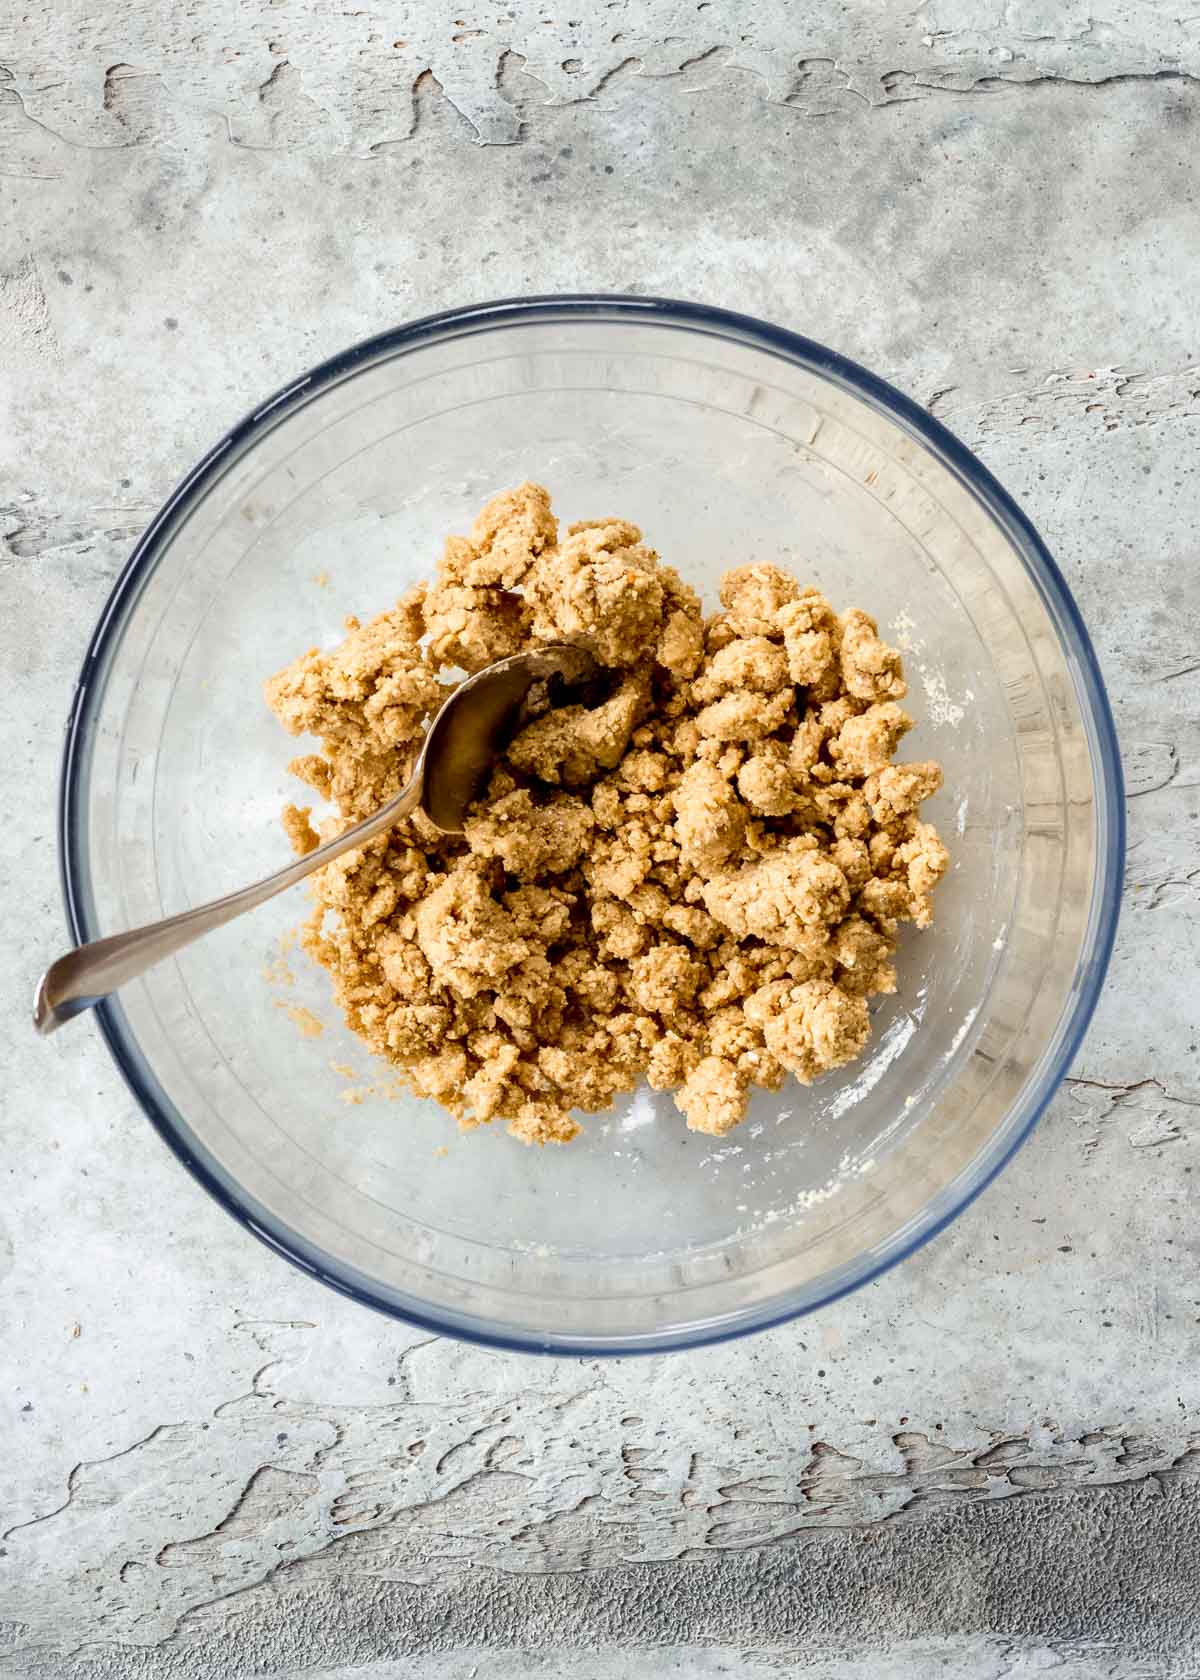 Oats, peanut butter and maple syrup being mixed together in a glass bowl to form the snickers bar recipe base.